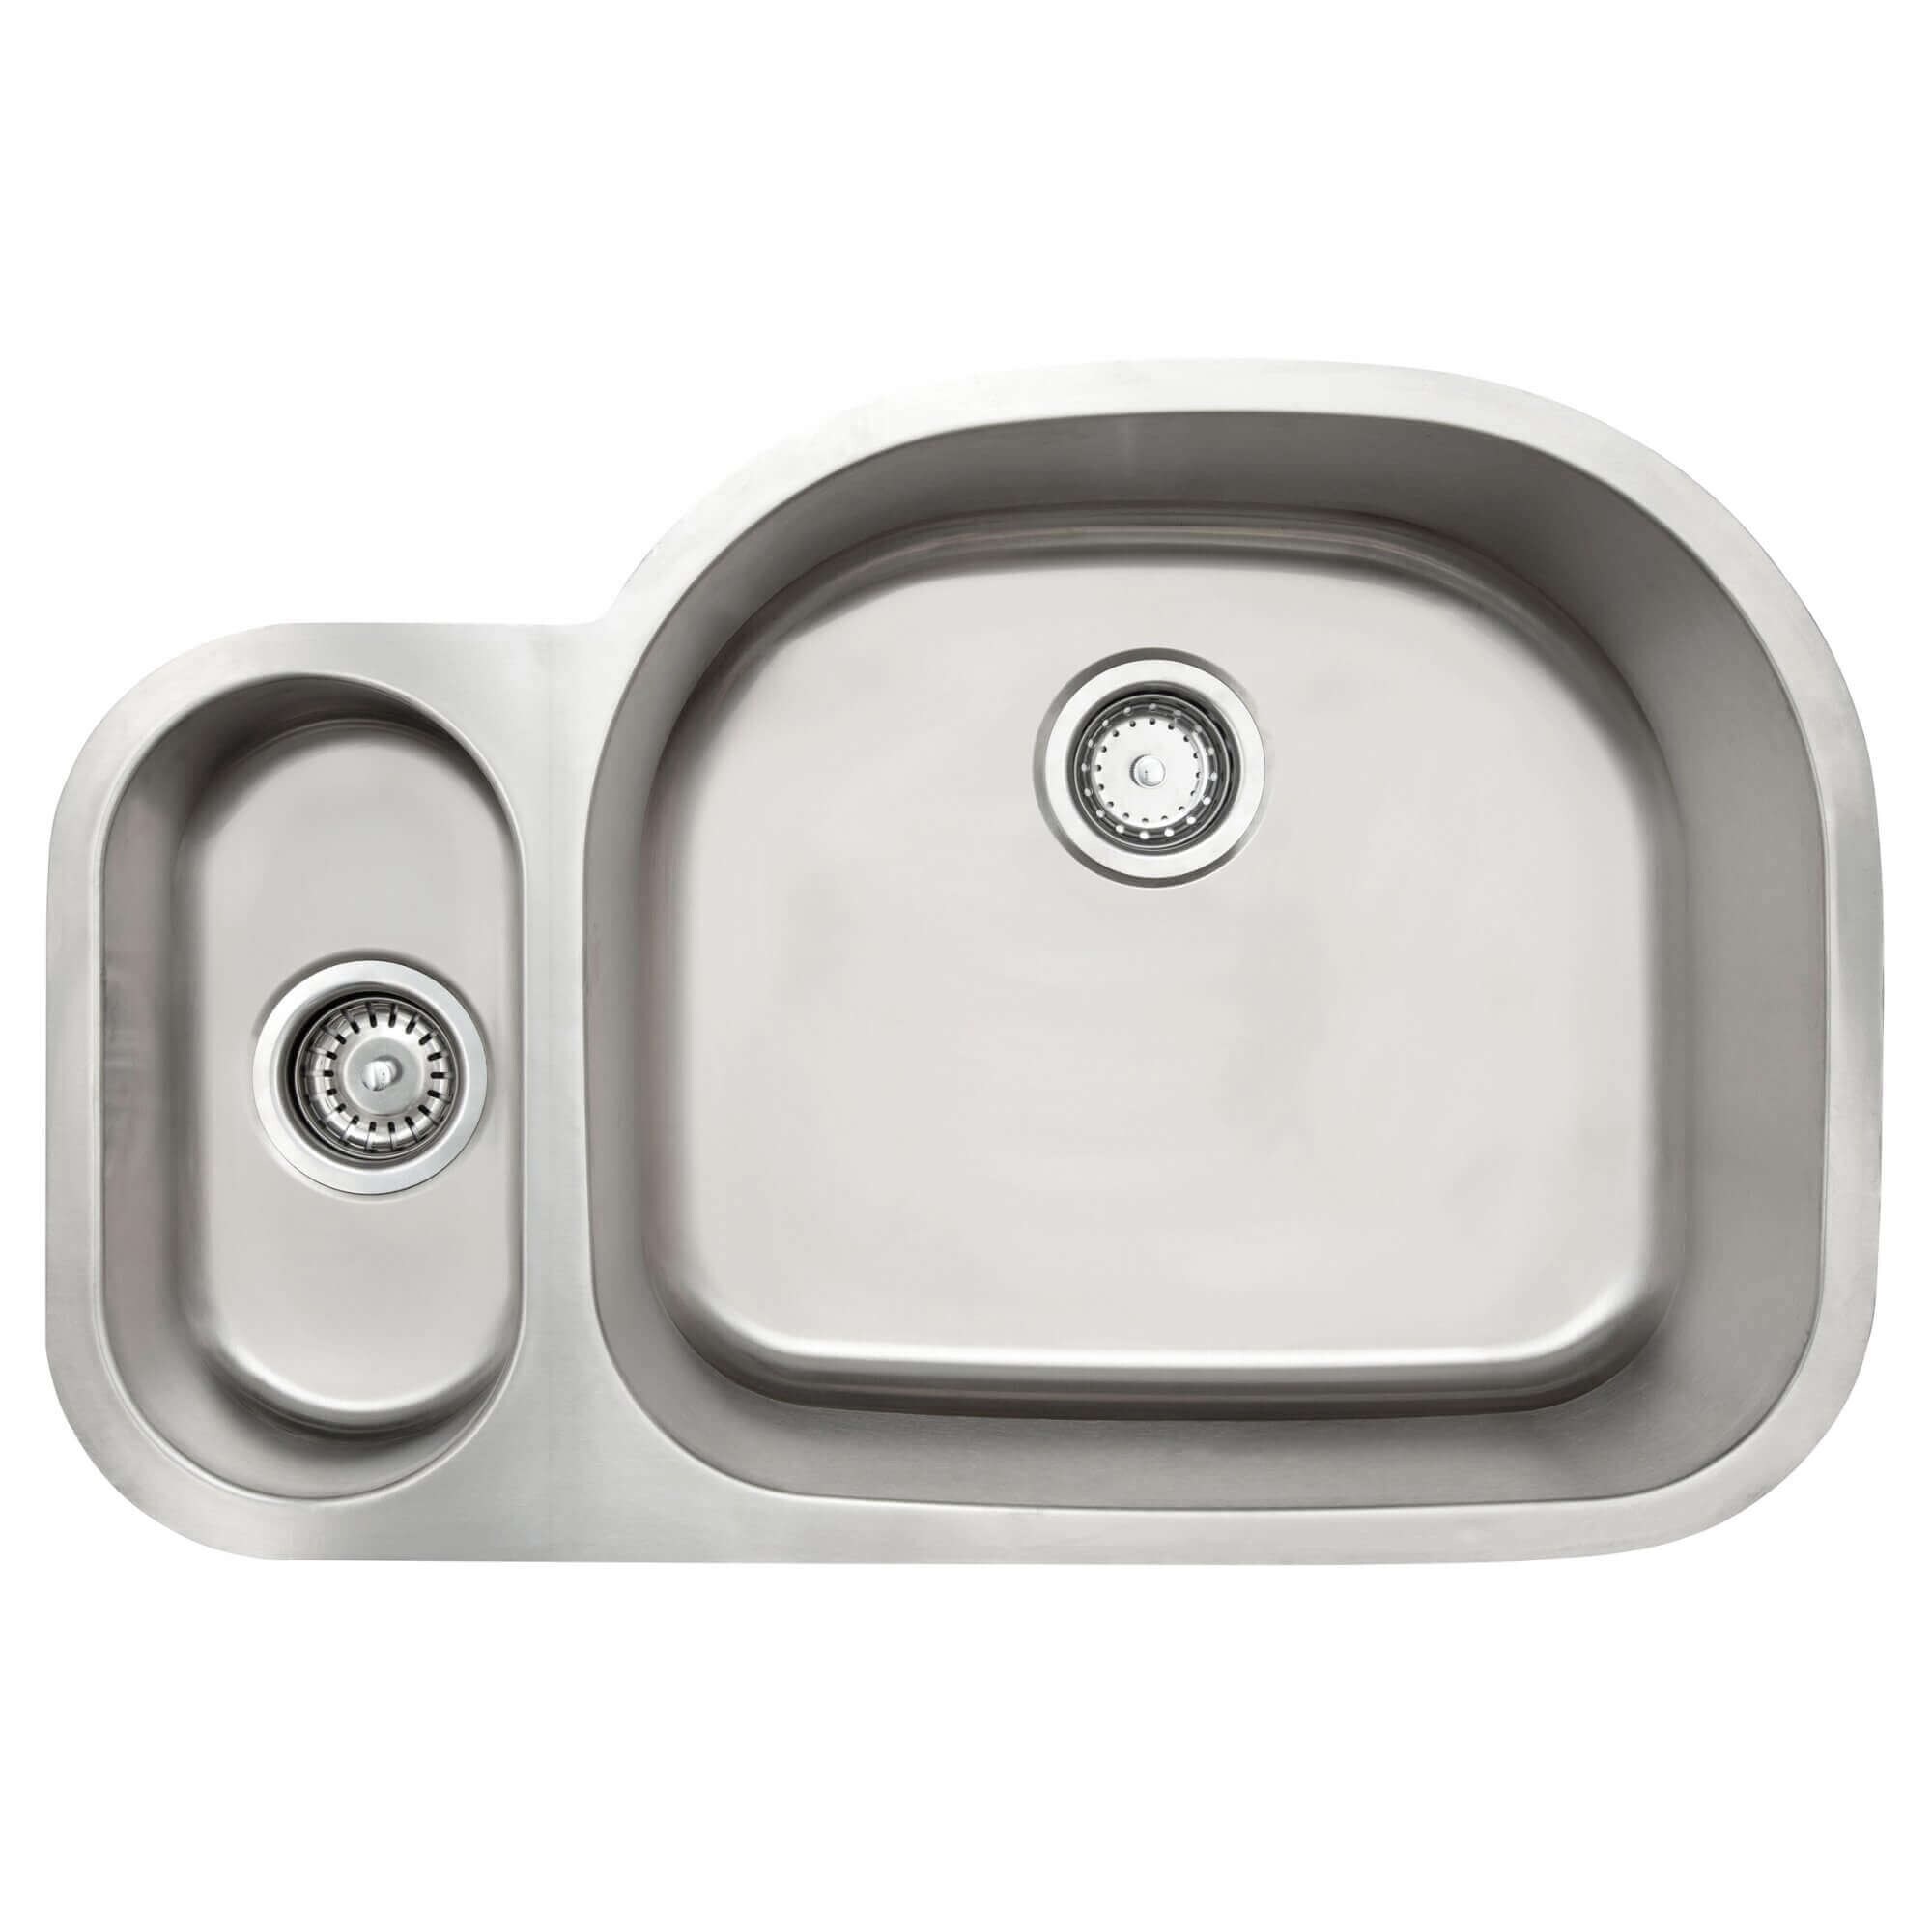 Fine Fixtures Undermount Offset Stainless Steel Double Bowl - 31.5" x 21"